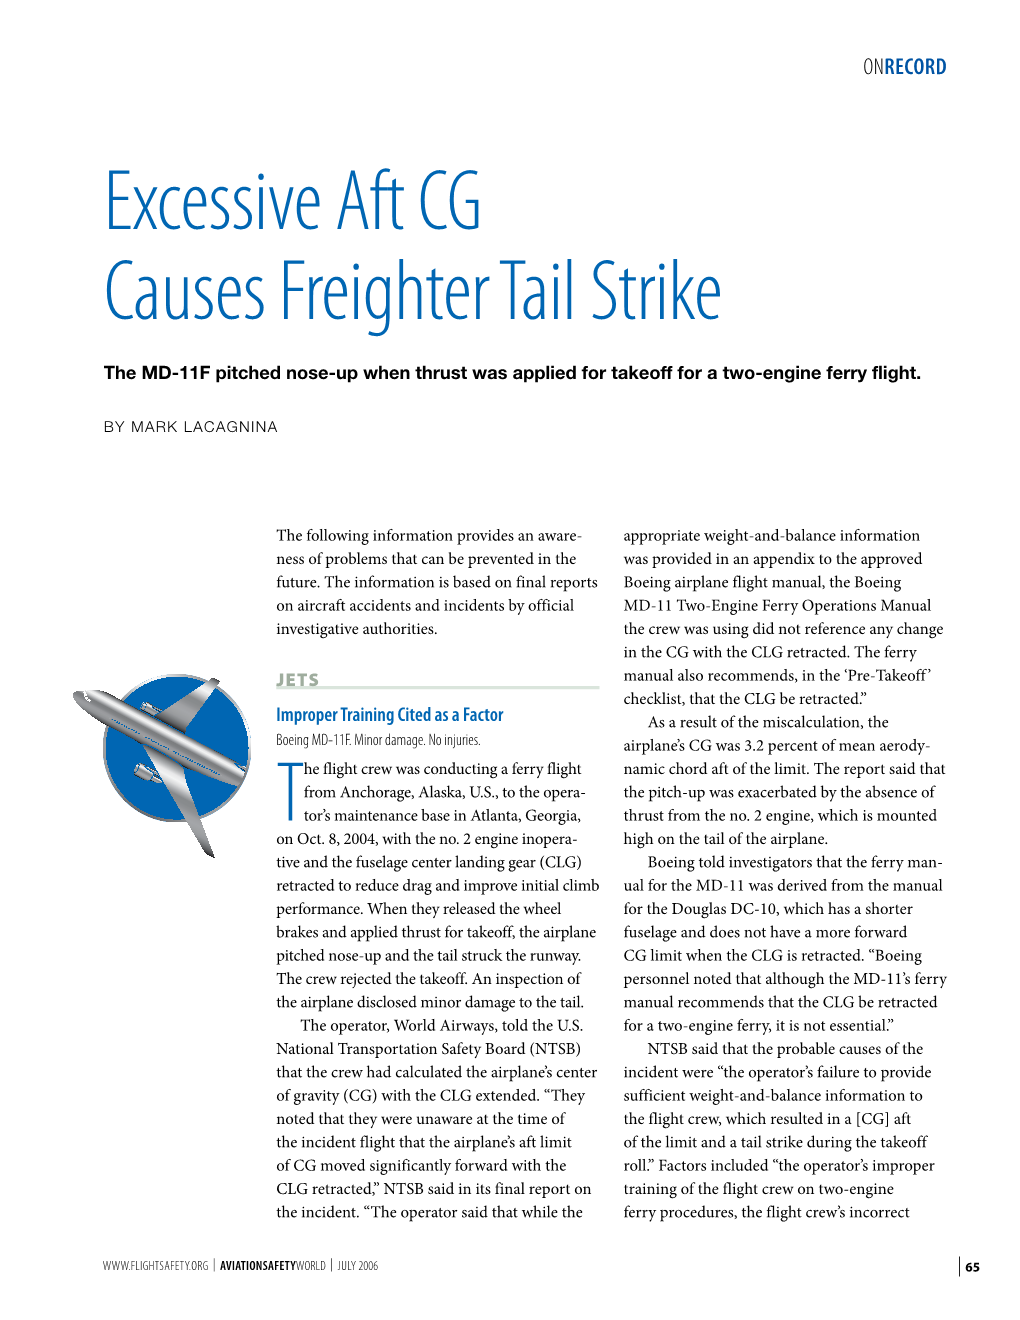 Excessive Aft CG Causes Freighter Tail Strike